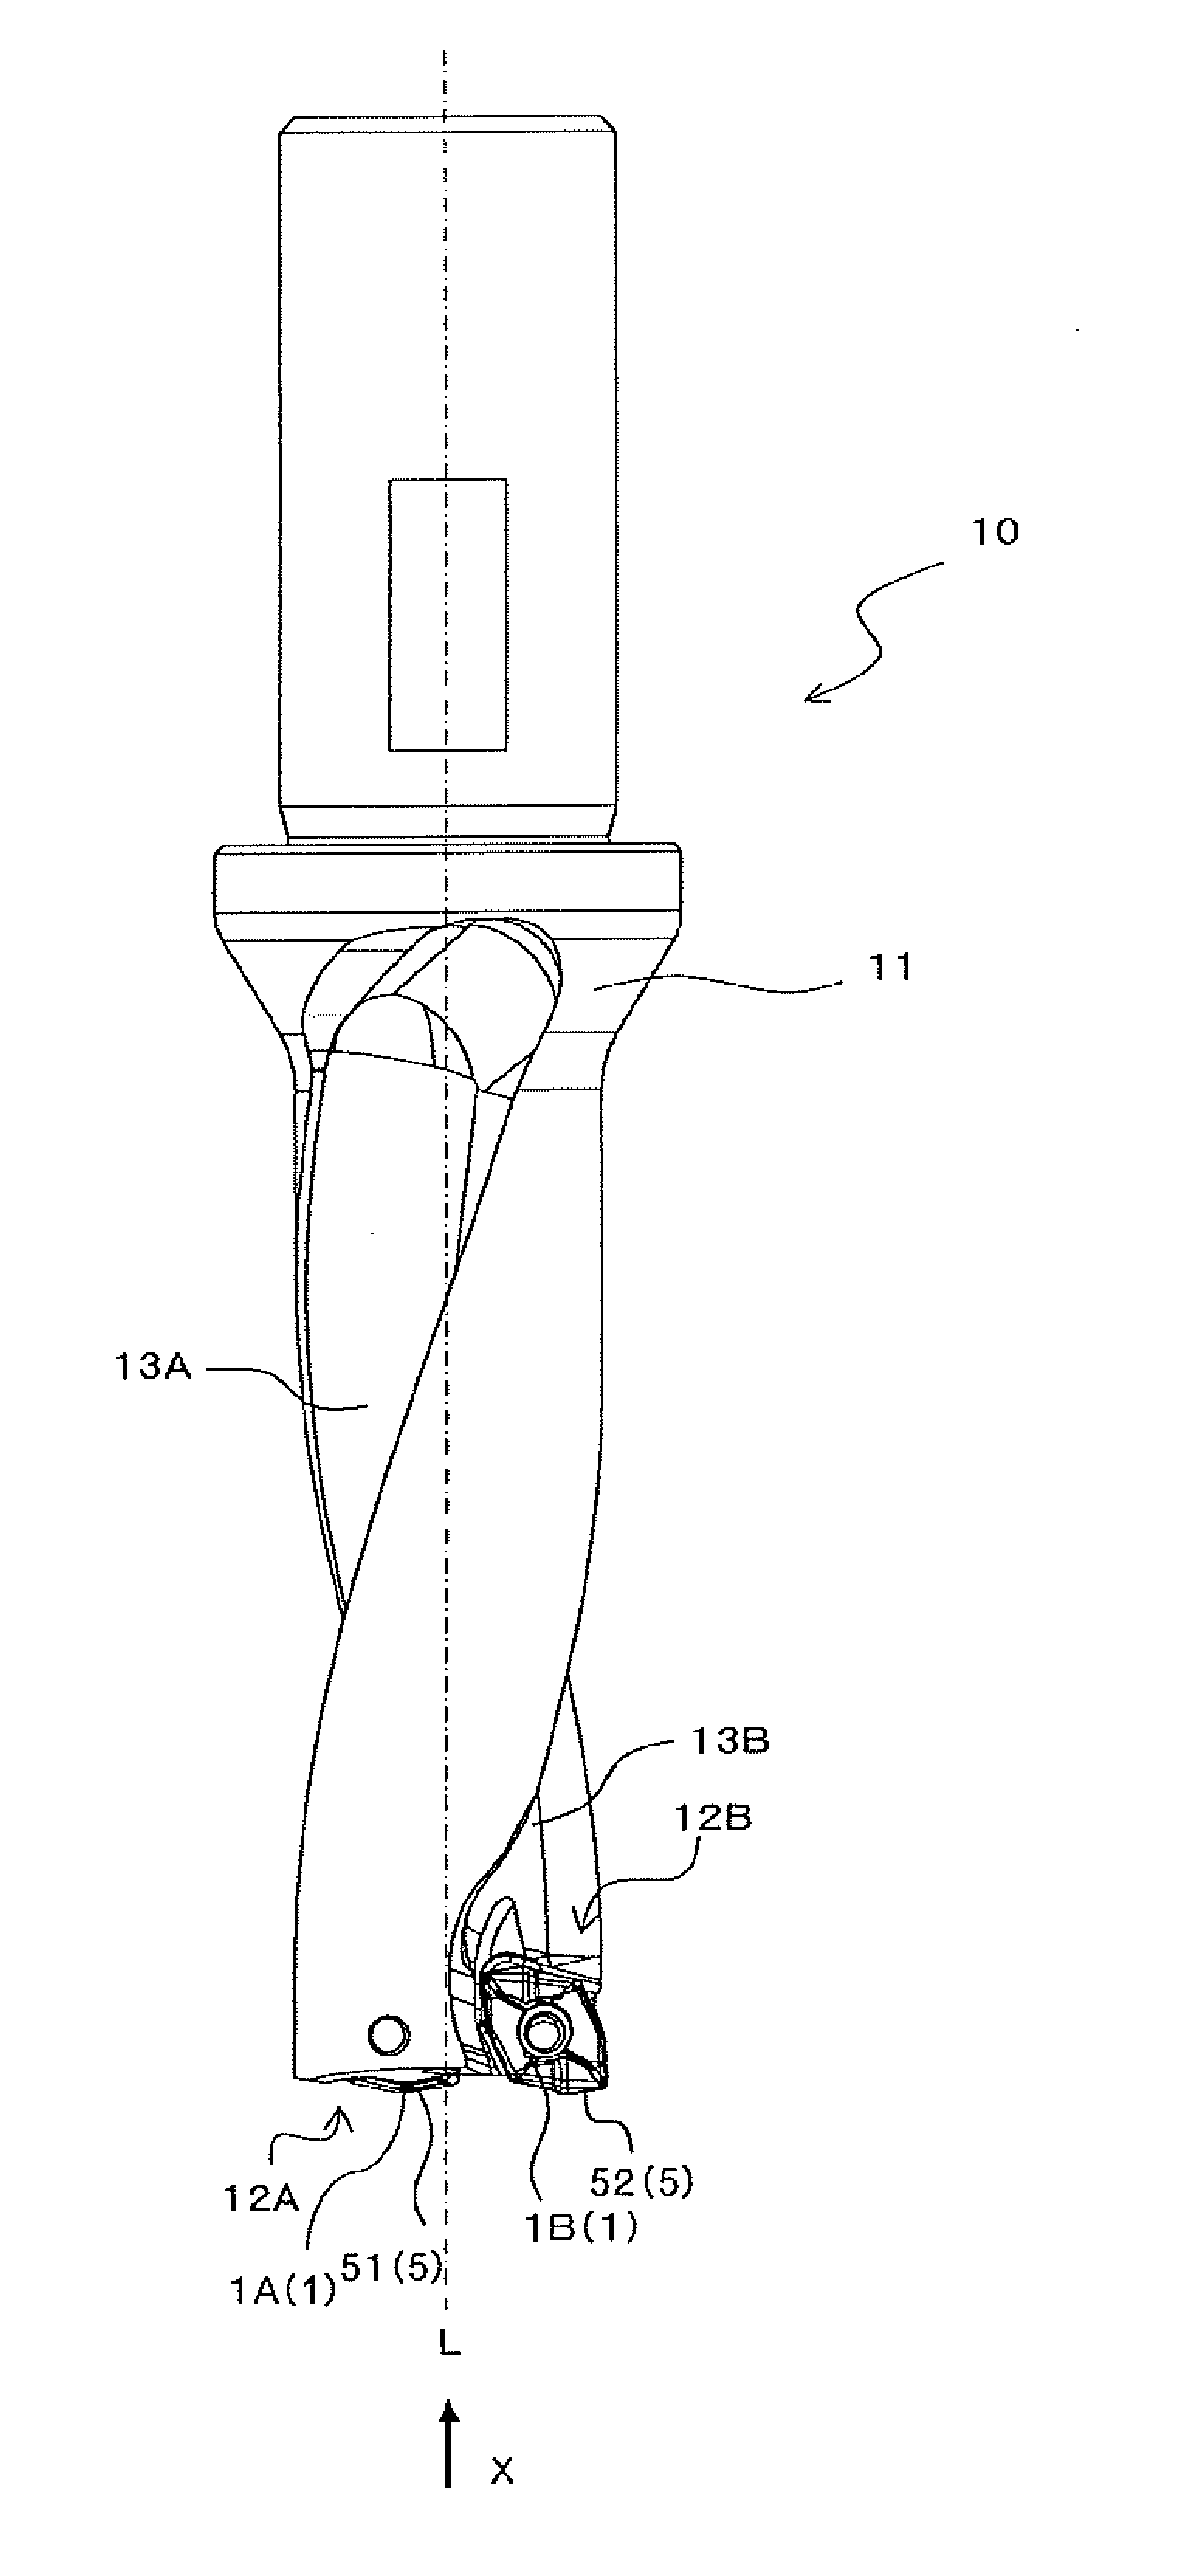 Drill, Cutting Insert, and Method of Manufacturing Cut Product